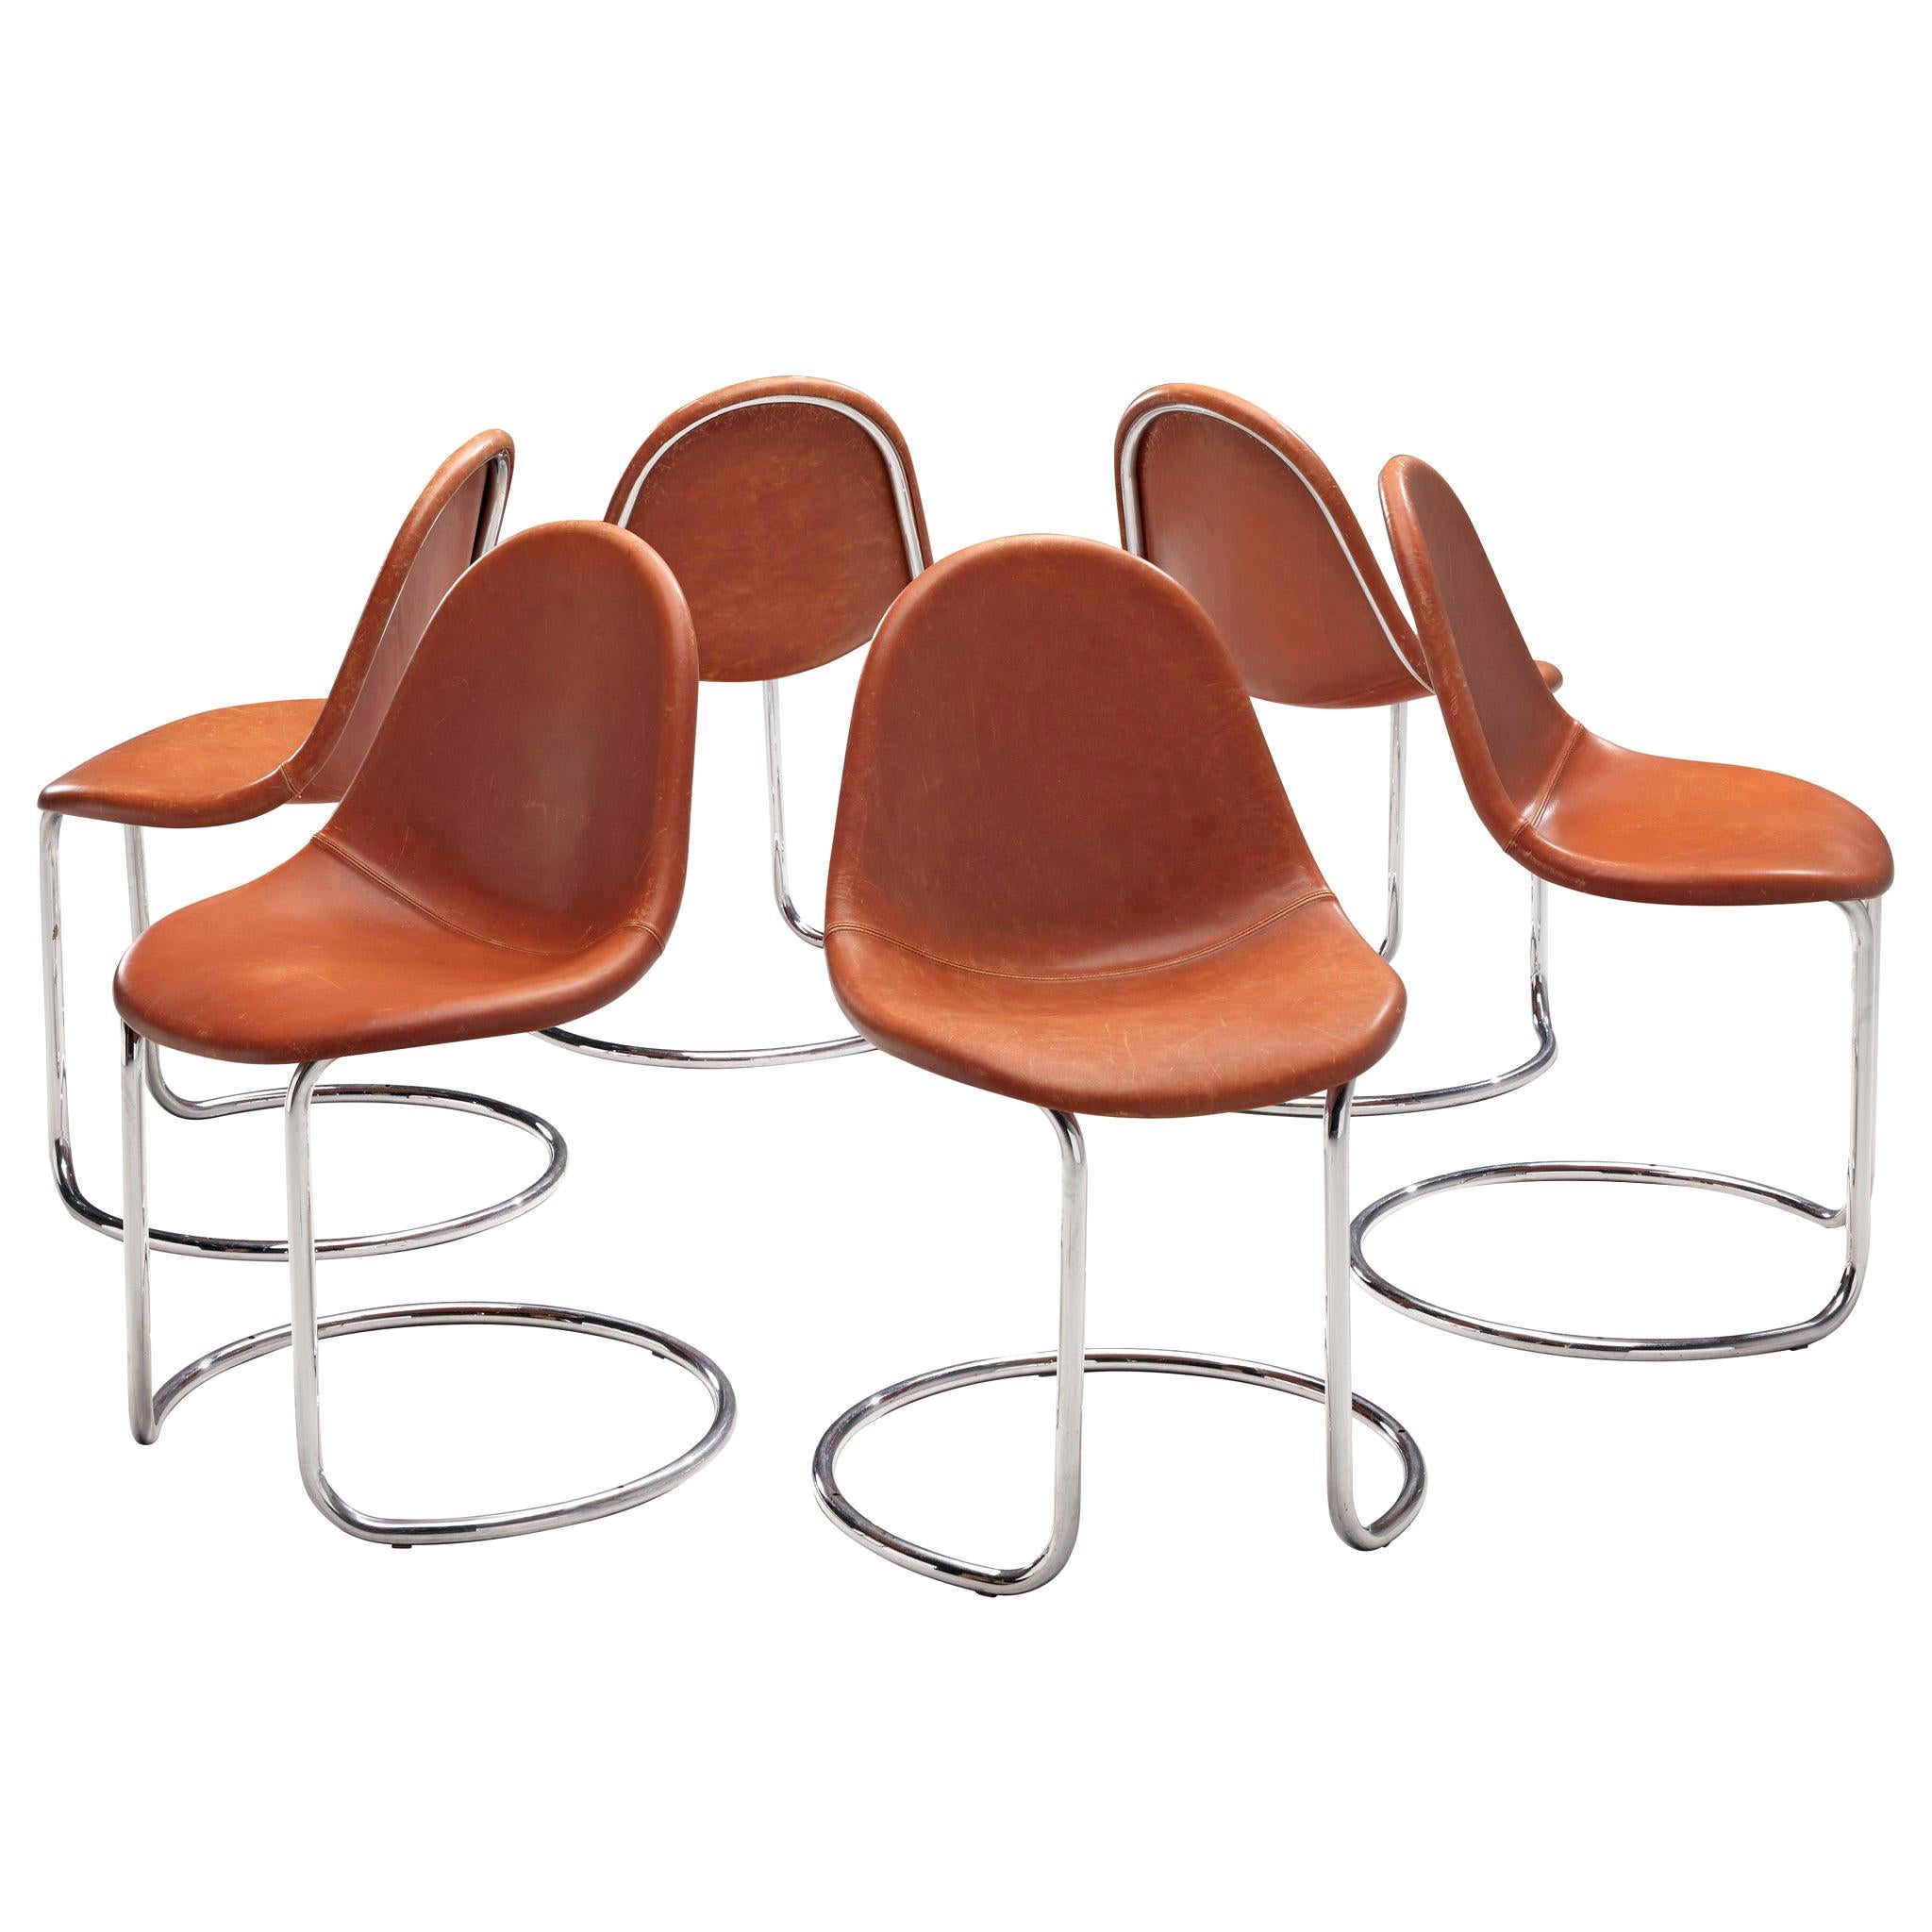 Giotto Stoppino Set of Six 'Maya' Chairs in Cognac Leather